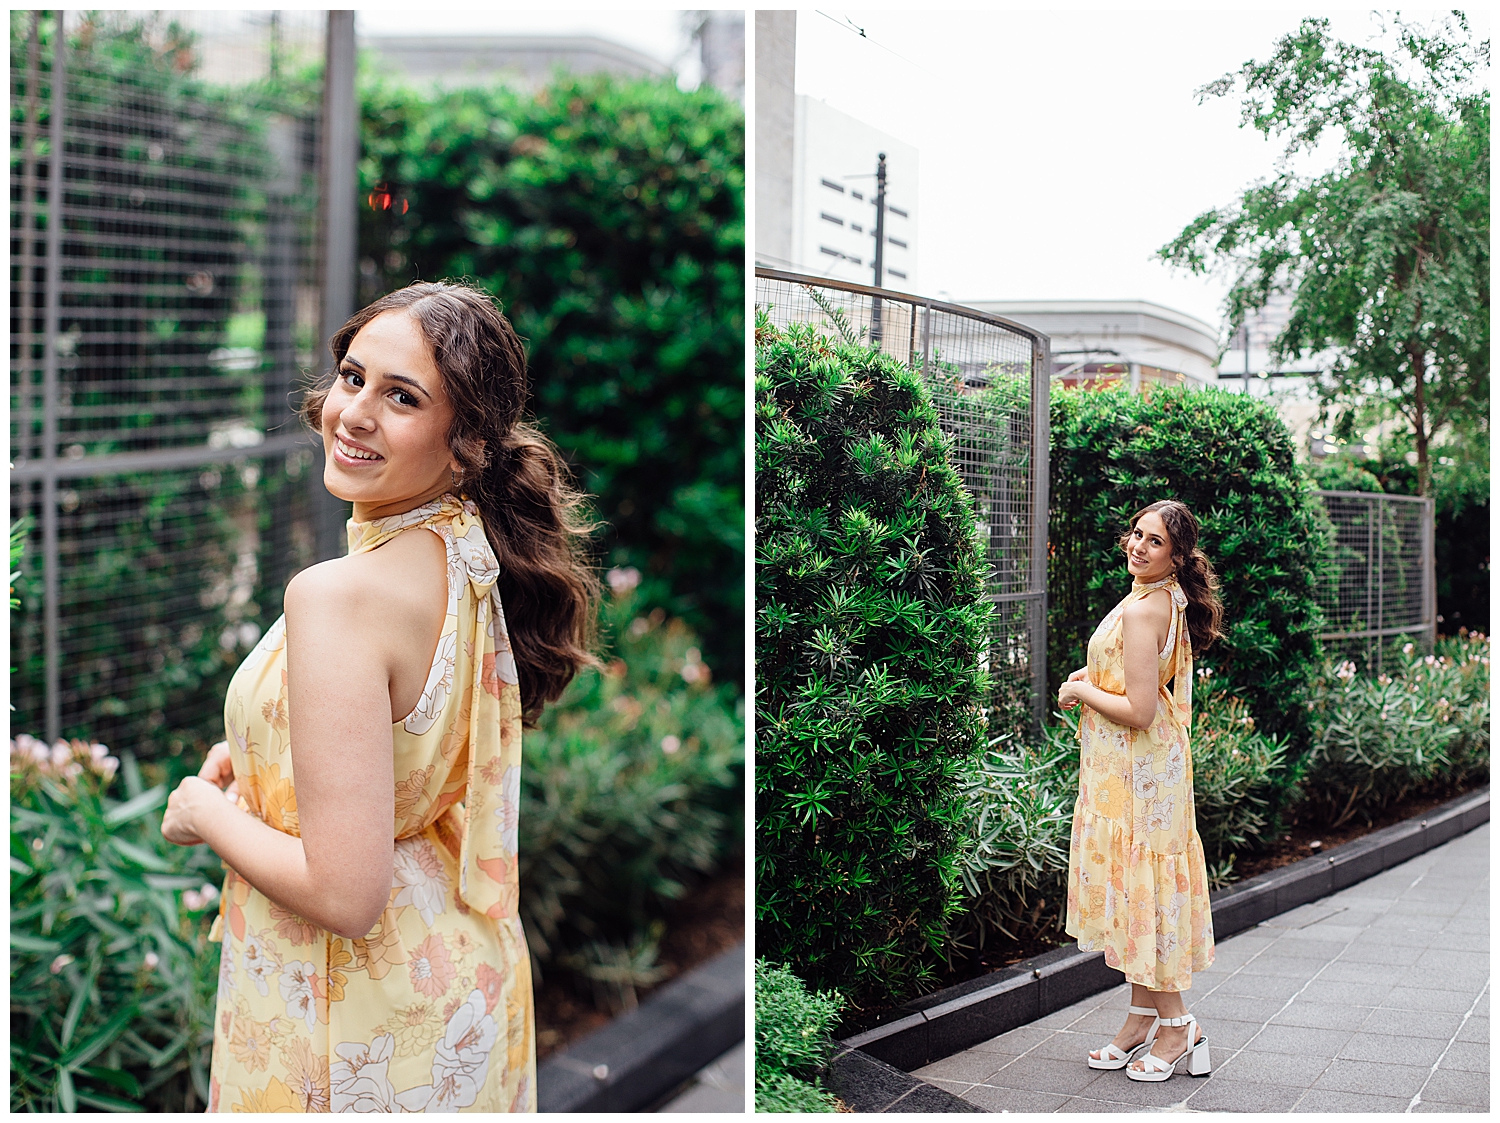 high school senior girl in yellow floral dress standing on Main Street in front of greenery